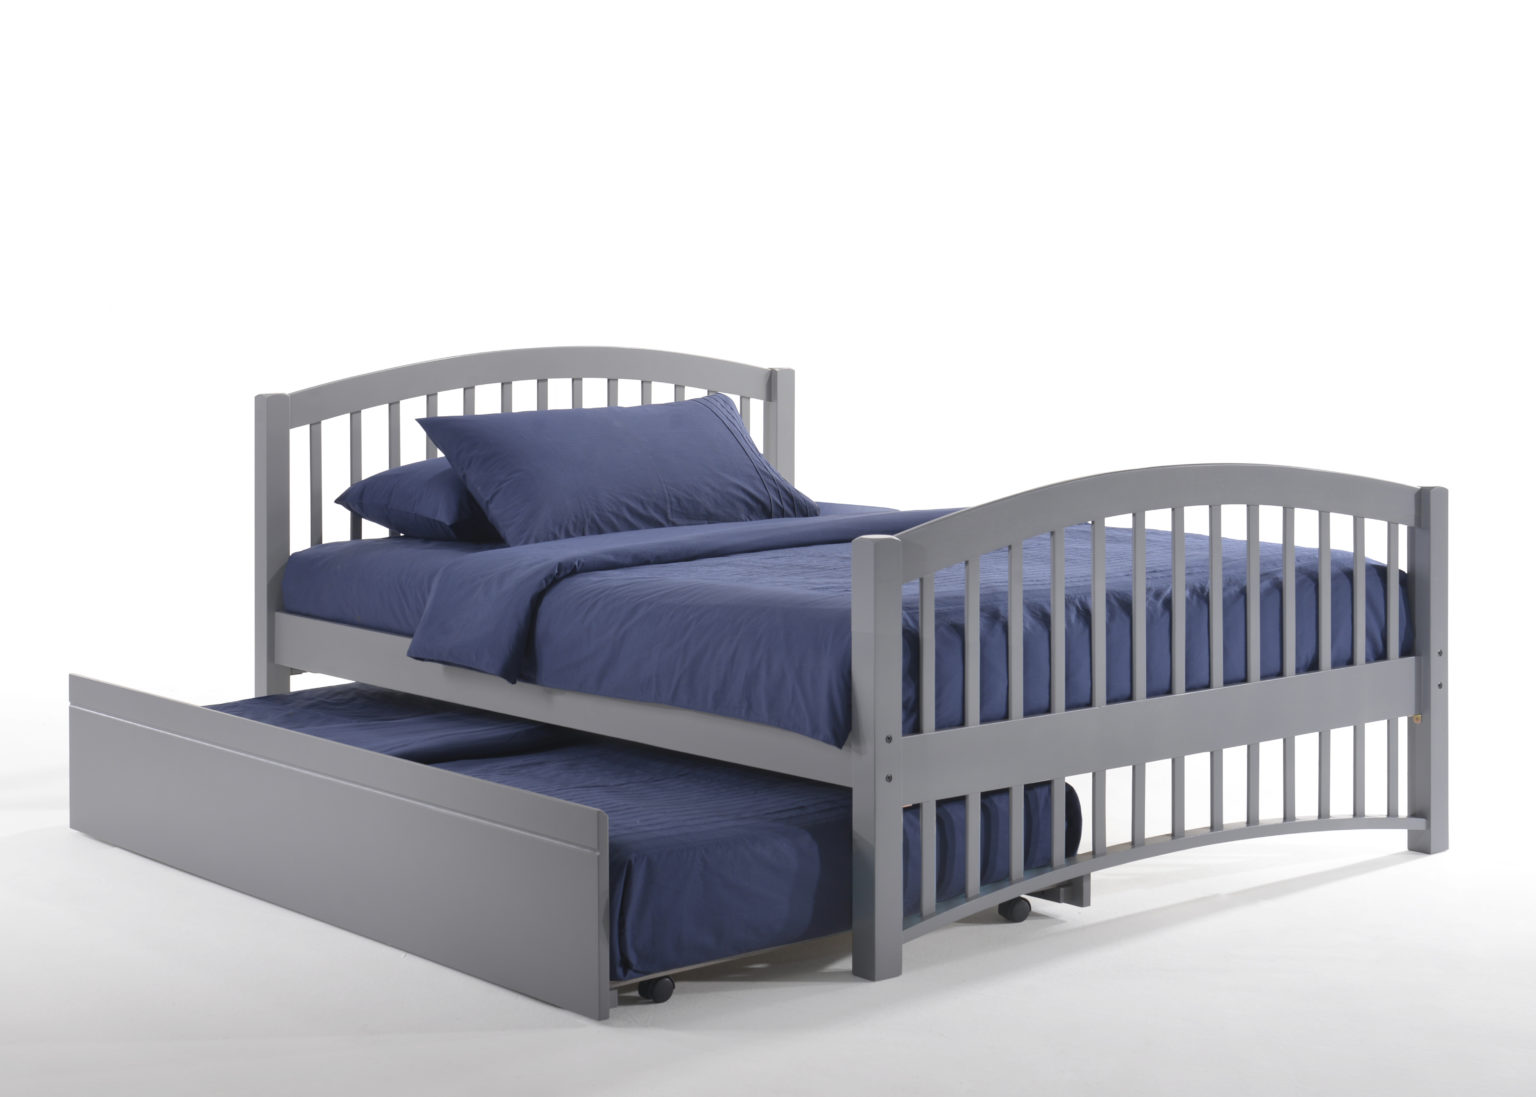 Full Zest Molasses Bed in Gray with Trundle